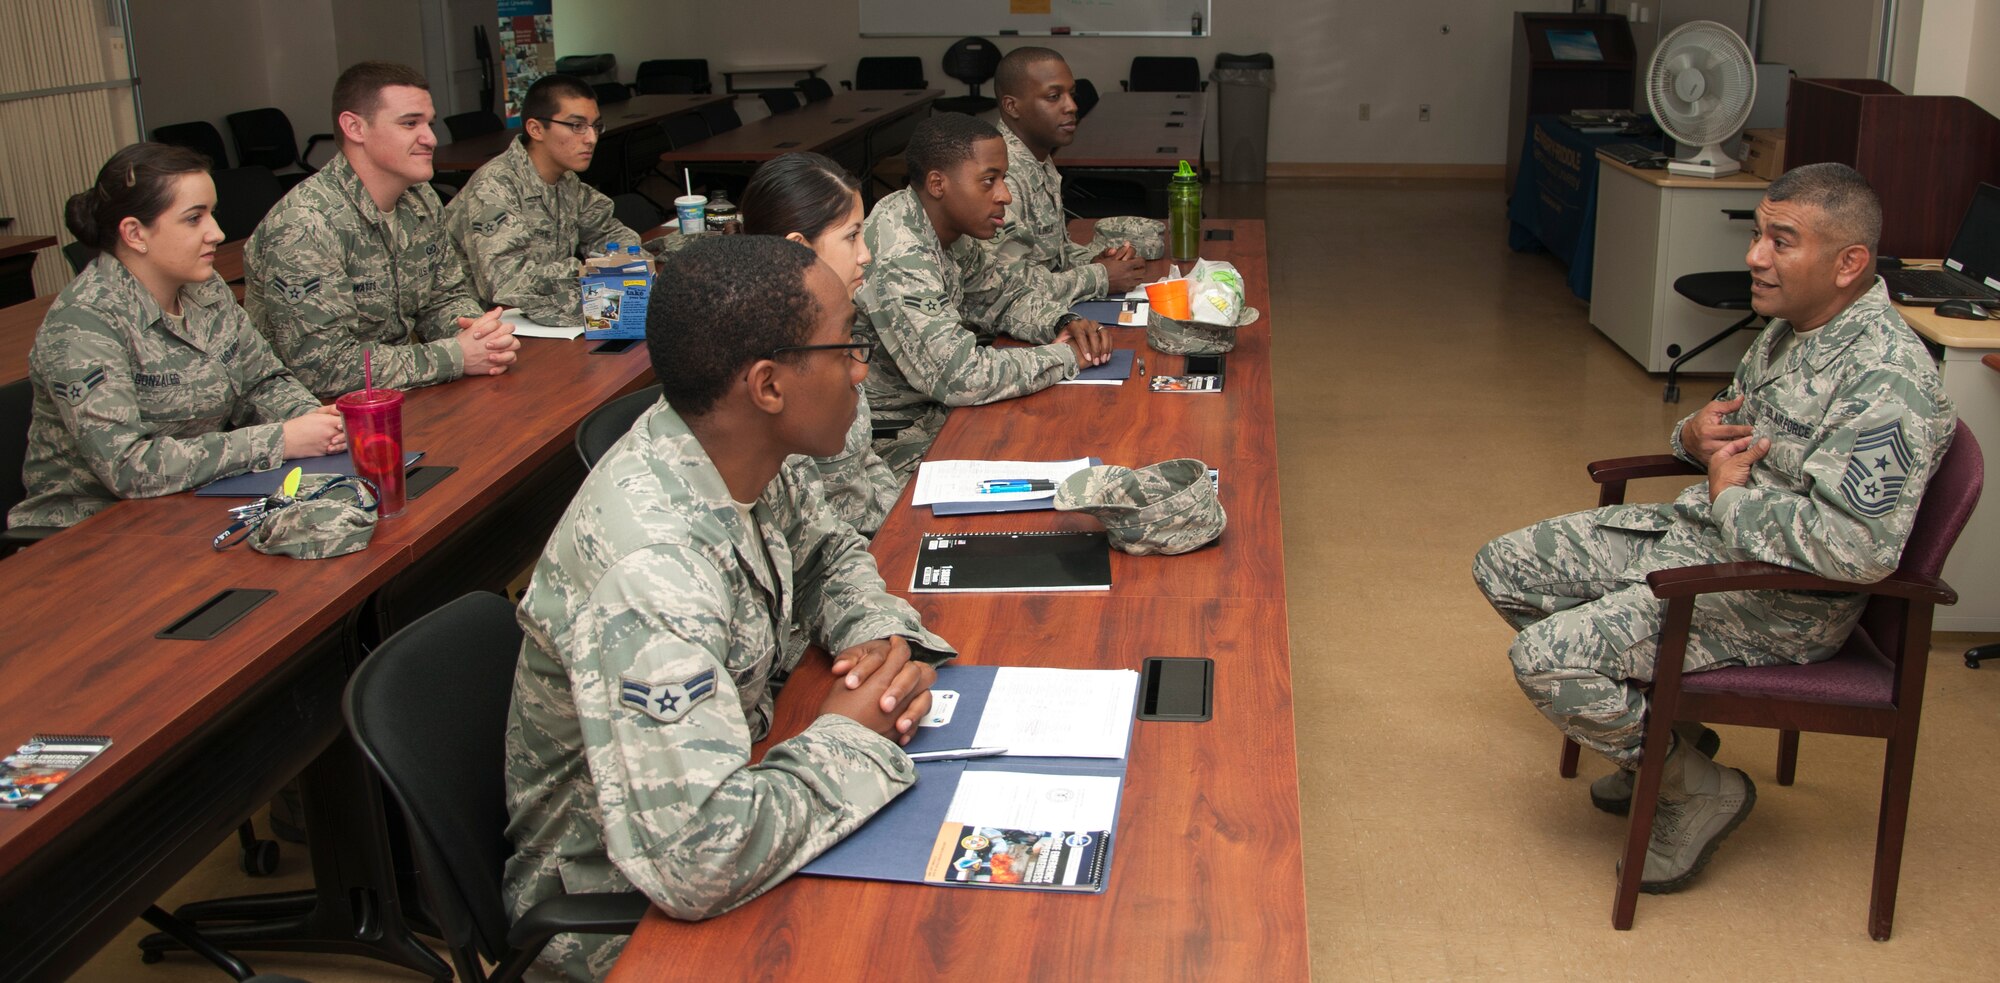 Chief Master Sgt. Gerardo Tapia, Air Education and Training Command command chief speaks with first-term Airmen at Laughlin Air Force Base, Texas, May 16, 2013. Tapia has visited several bases in AETC after assuming his position in January of 2013. (U.S. Air Force photo/Airman 1st Class John D. Partlow)